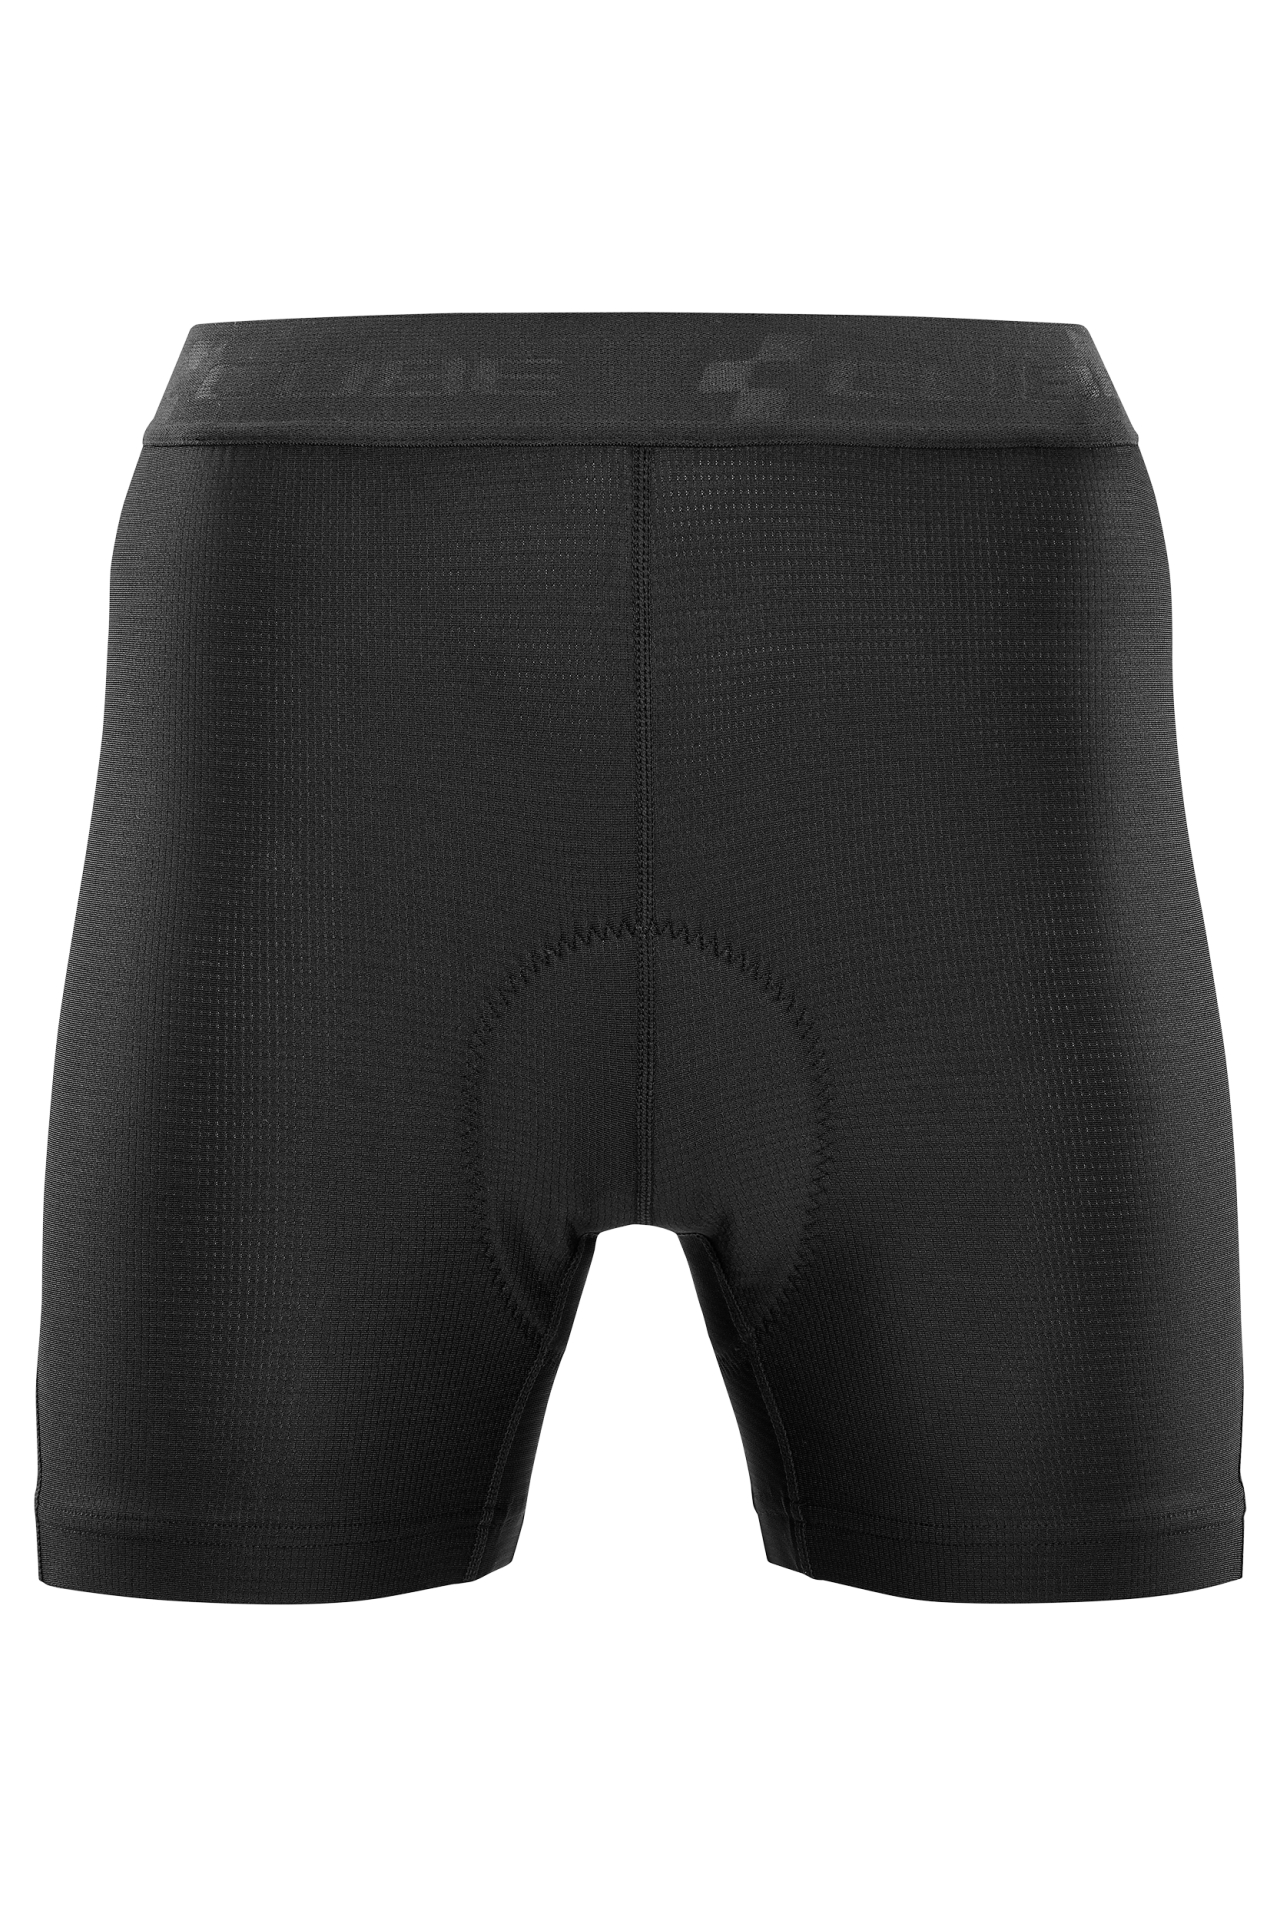 CUBE ATX WS Baggy Shorts CMPT inkl. Innenhose violet S (36)